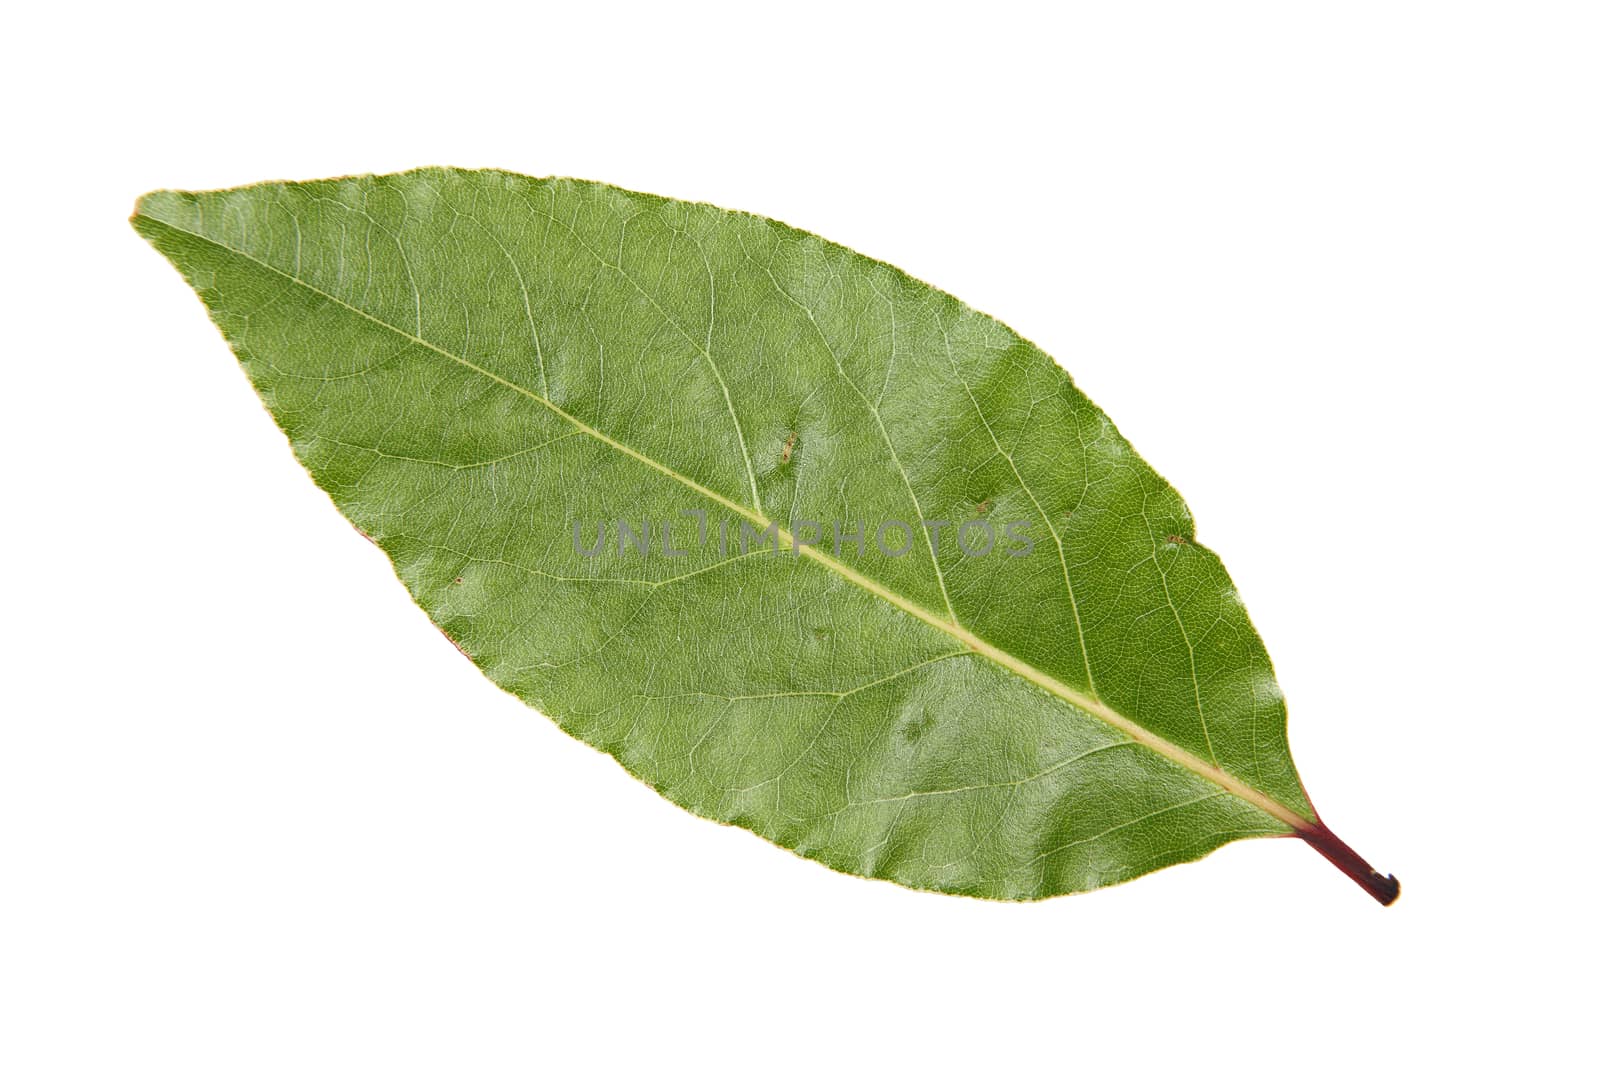 Bay leaf cut out and isolated on a white background 